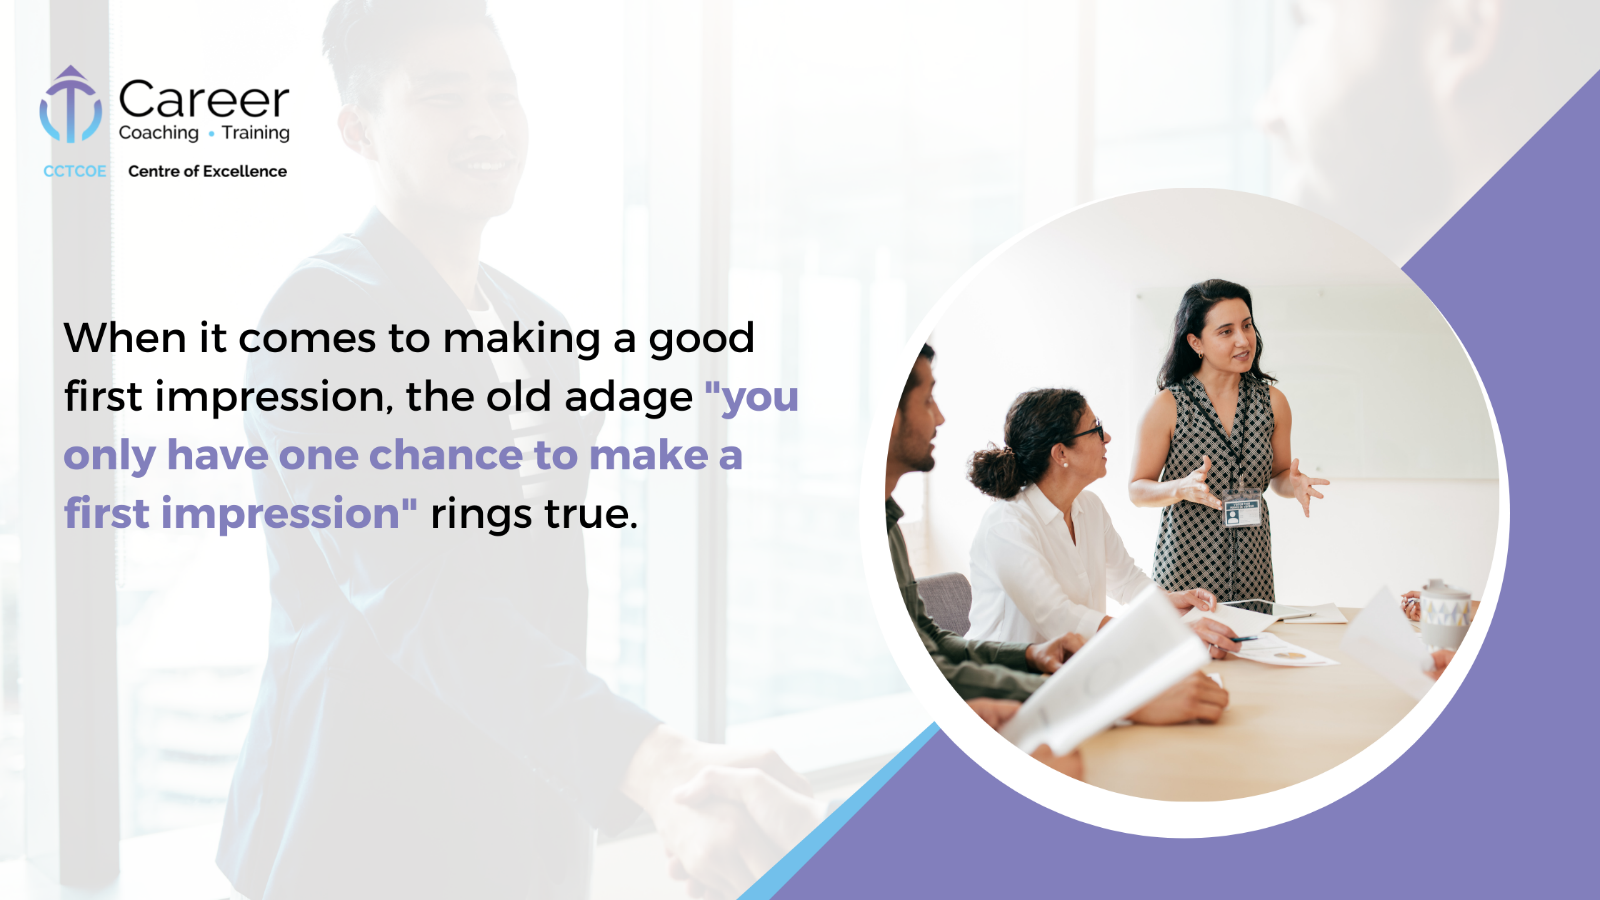 When it comes to making a good first impression, the old adage "you only have one chance to make a first impression" rings true.